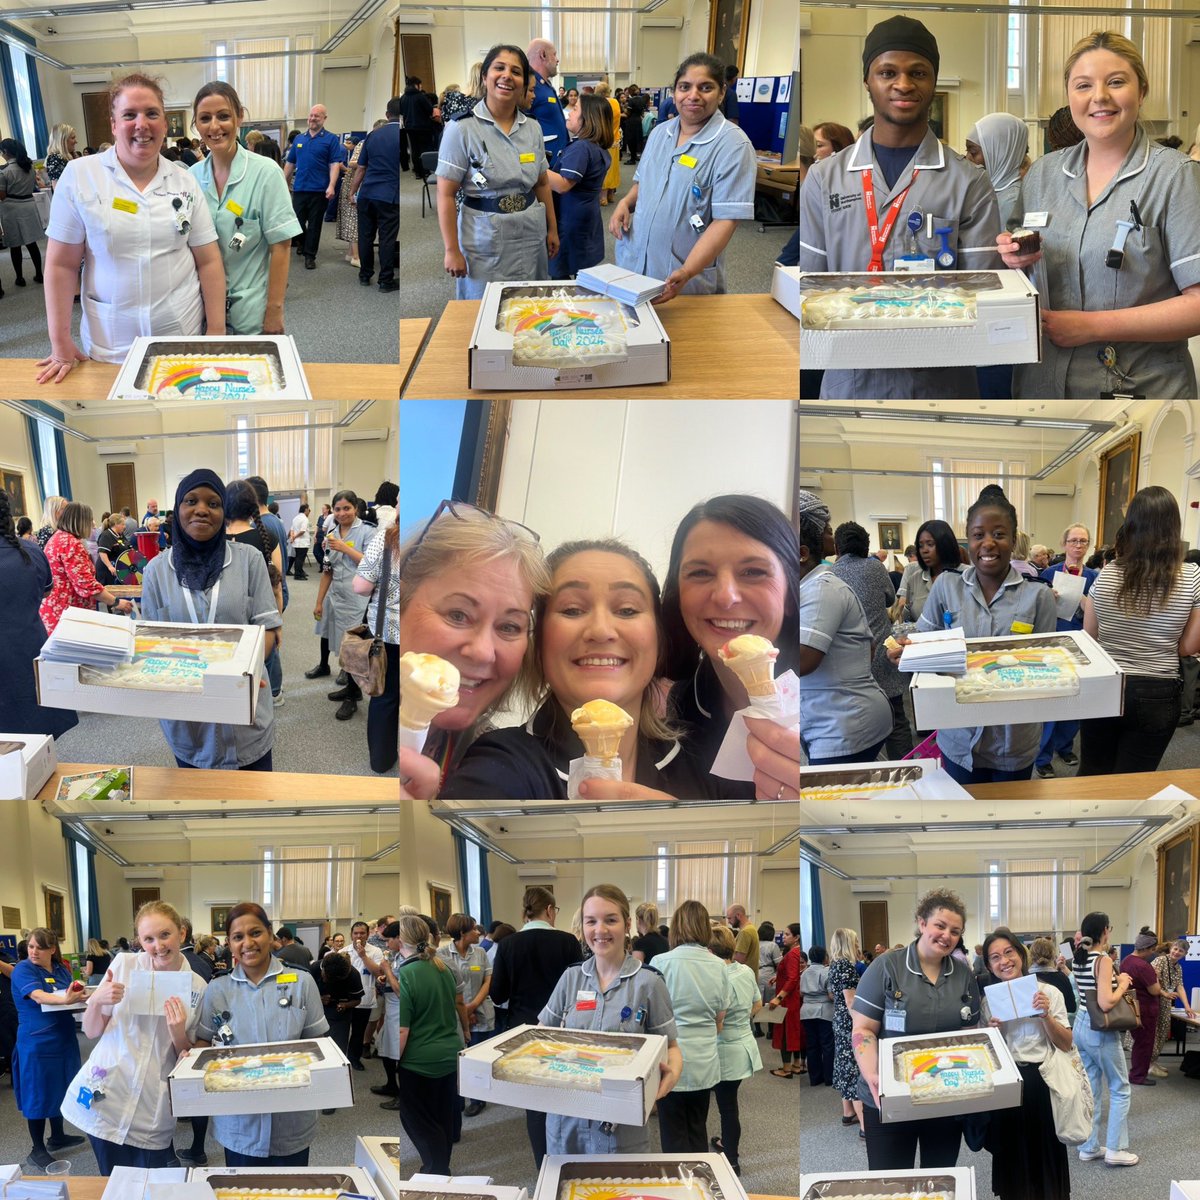 A great day kicking off our nurses day celebrations @NGHnhstrust with our nurses day summer fete! Games, icecream, cake and a great group of colleagues. What a fabulous day!! @NereaOdongoNGH @SophiePNA @SarahCoiffait @Jendscott @JoSmithngh @ro_harvey12 @PalmerPW1 @RMitchell_NHS